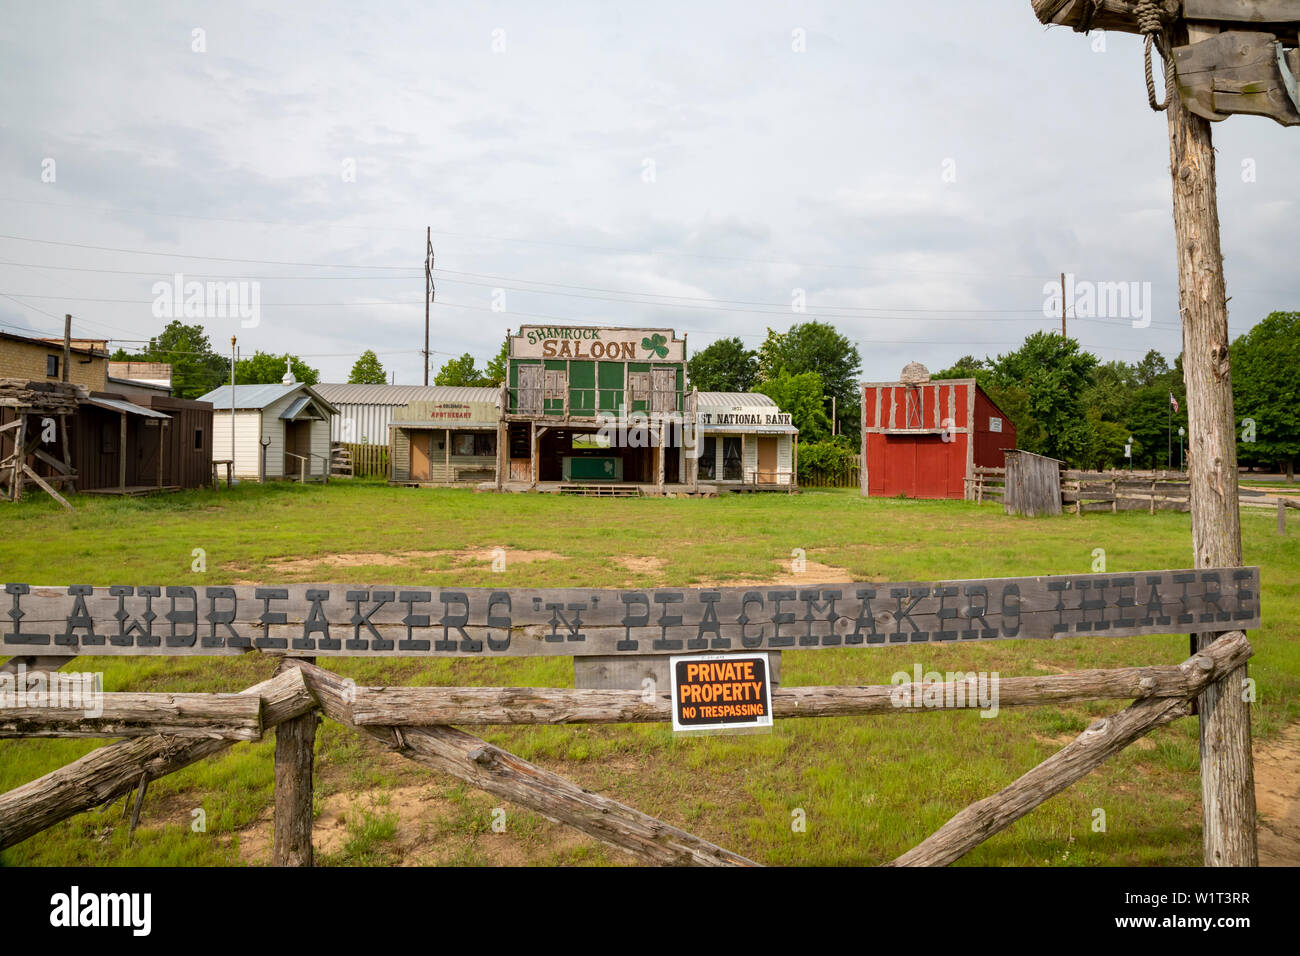 Fort Smith, Arkansas - A 'No Trespassing' sign outside the Lawbreakers 'n Peacemakers Theatre, a facility designed for historical reenactments of the Stock Photo